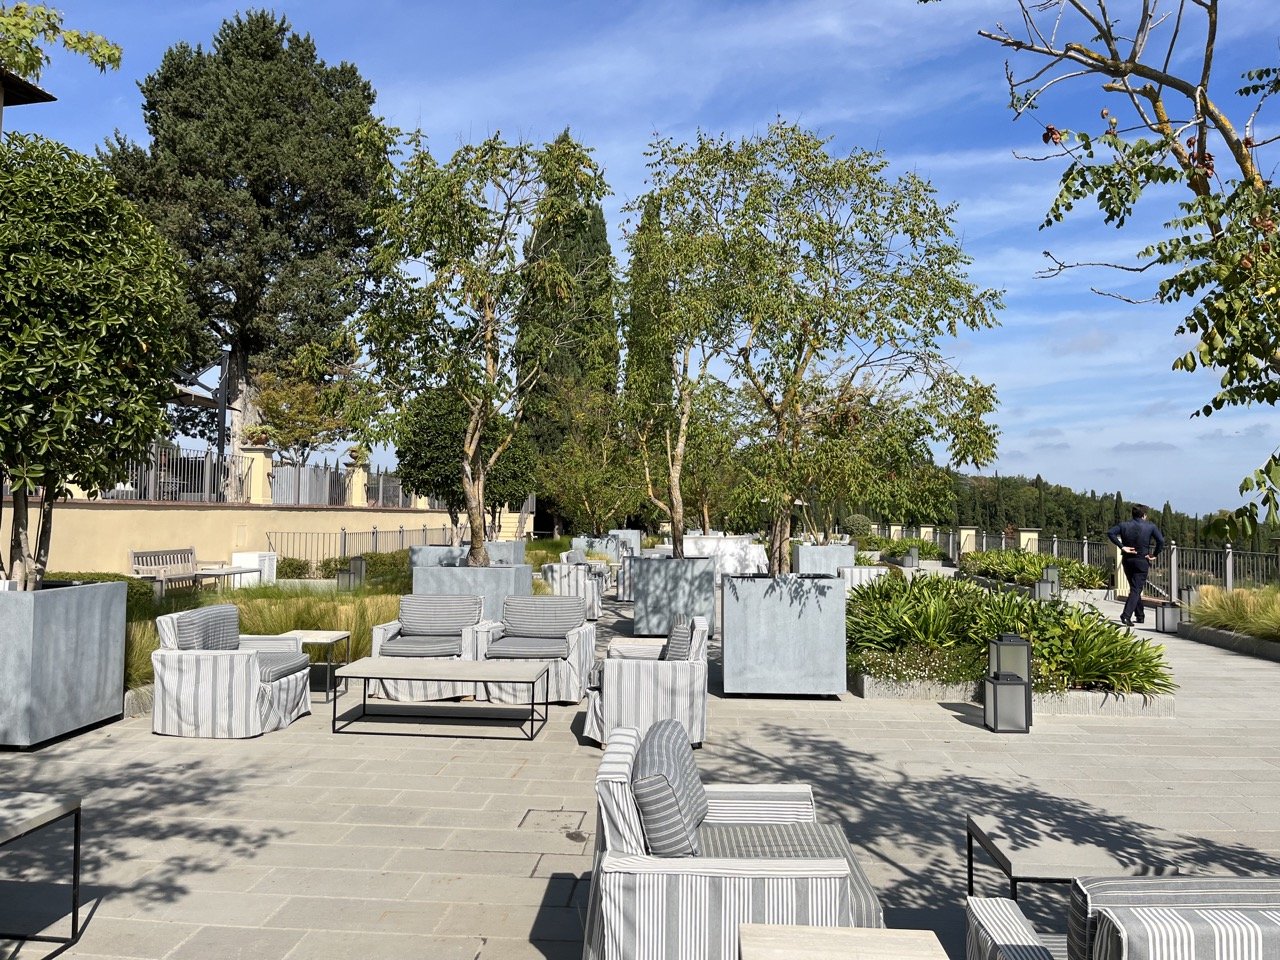 The outdoor seating area featuring loungers, sofas, and bright green trees and plants at the Castello del Nero luxury hotel in the town of Barberino, in Italy's Chianti region.